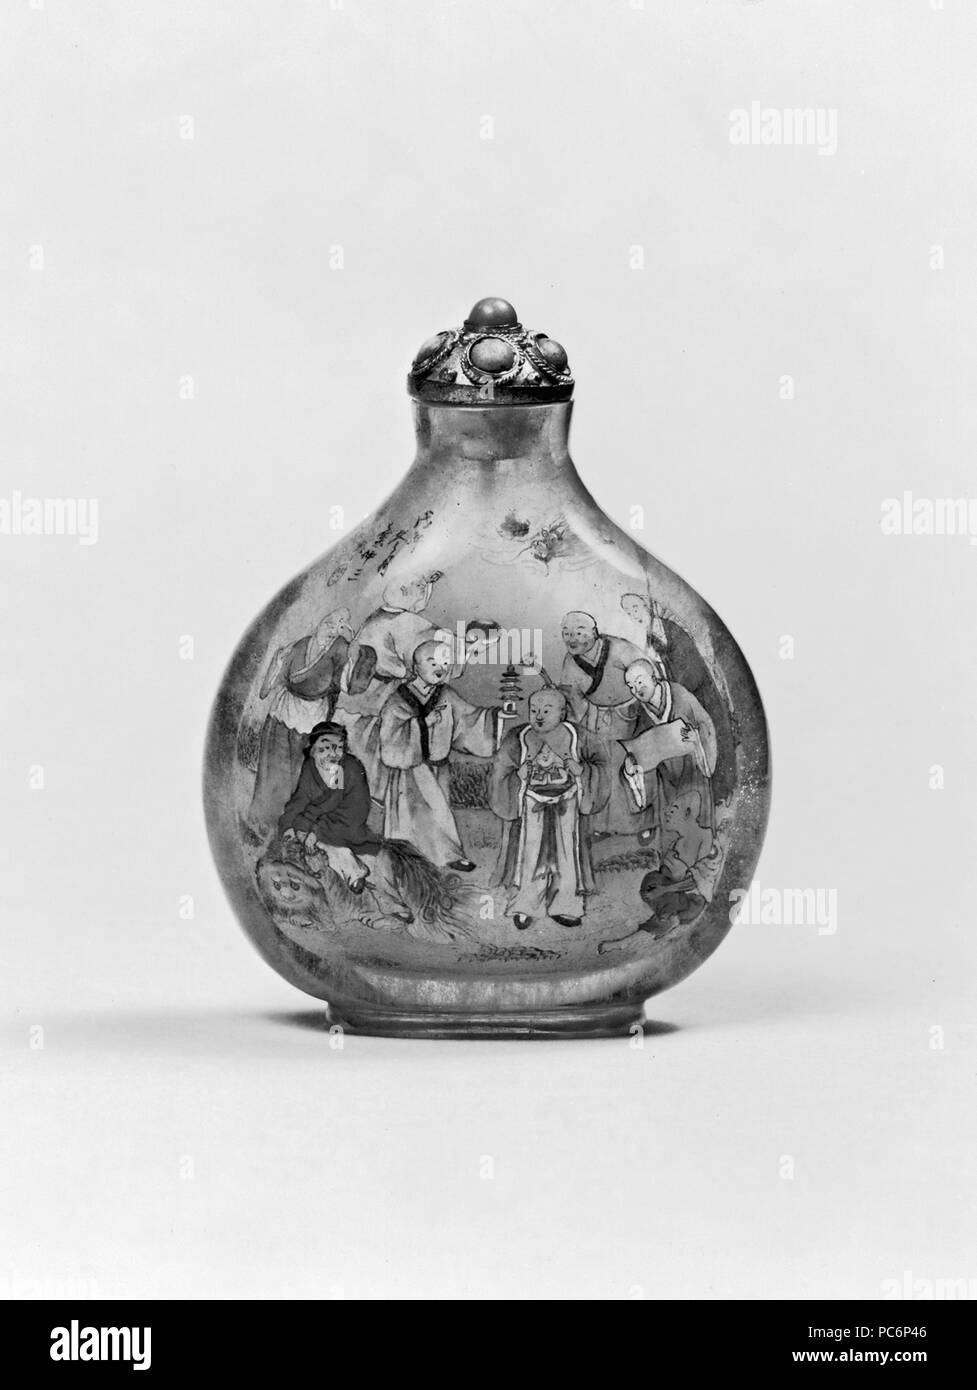 Ye Zhangsan (Chinese, active 1892-1912). 'Snuff Bottle with the 18 Buddhist Luohans [Lohans],' 1898. glass with interior painting and filigree. Walters Art Museum (47.585): Gift of Edward Choate O'Dell, 1977. 95 Ye Zhangsan - Snuff Bottle with Luohans -Lohans- - Walters 47585 Stock Photo